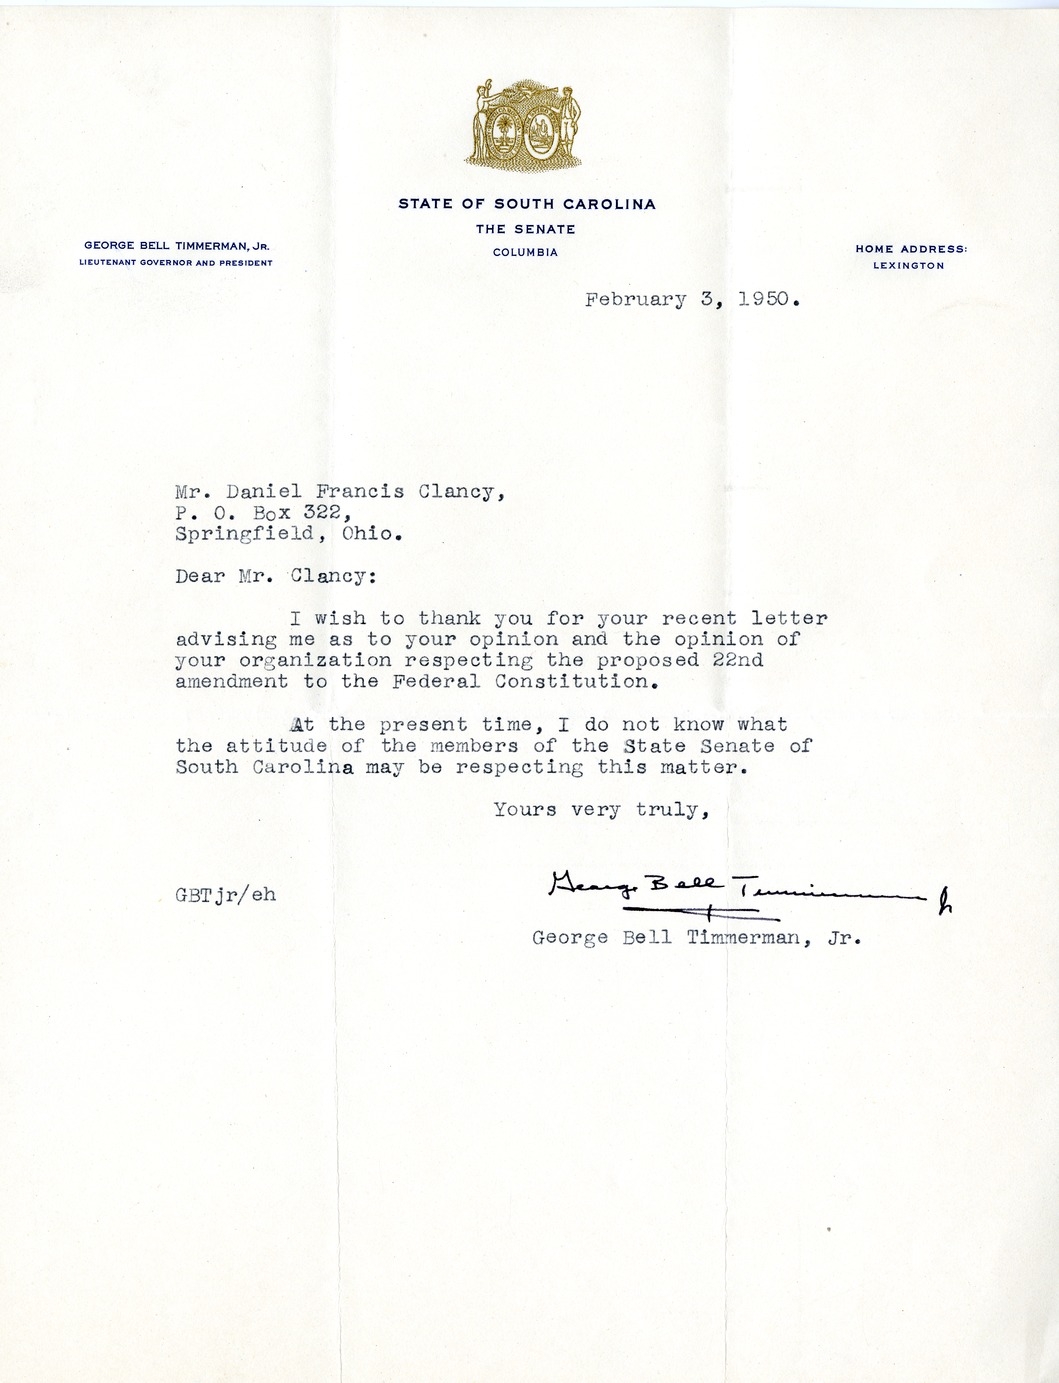 Letter from George Bell Timmerman, Jr. to Daniel C. Clancy